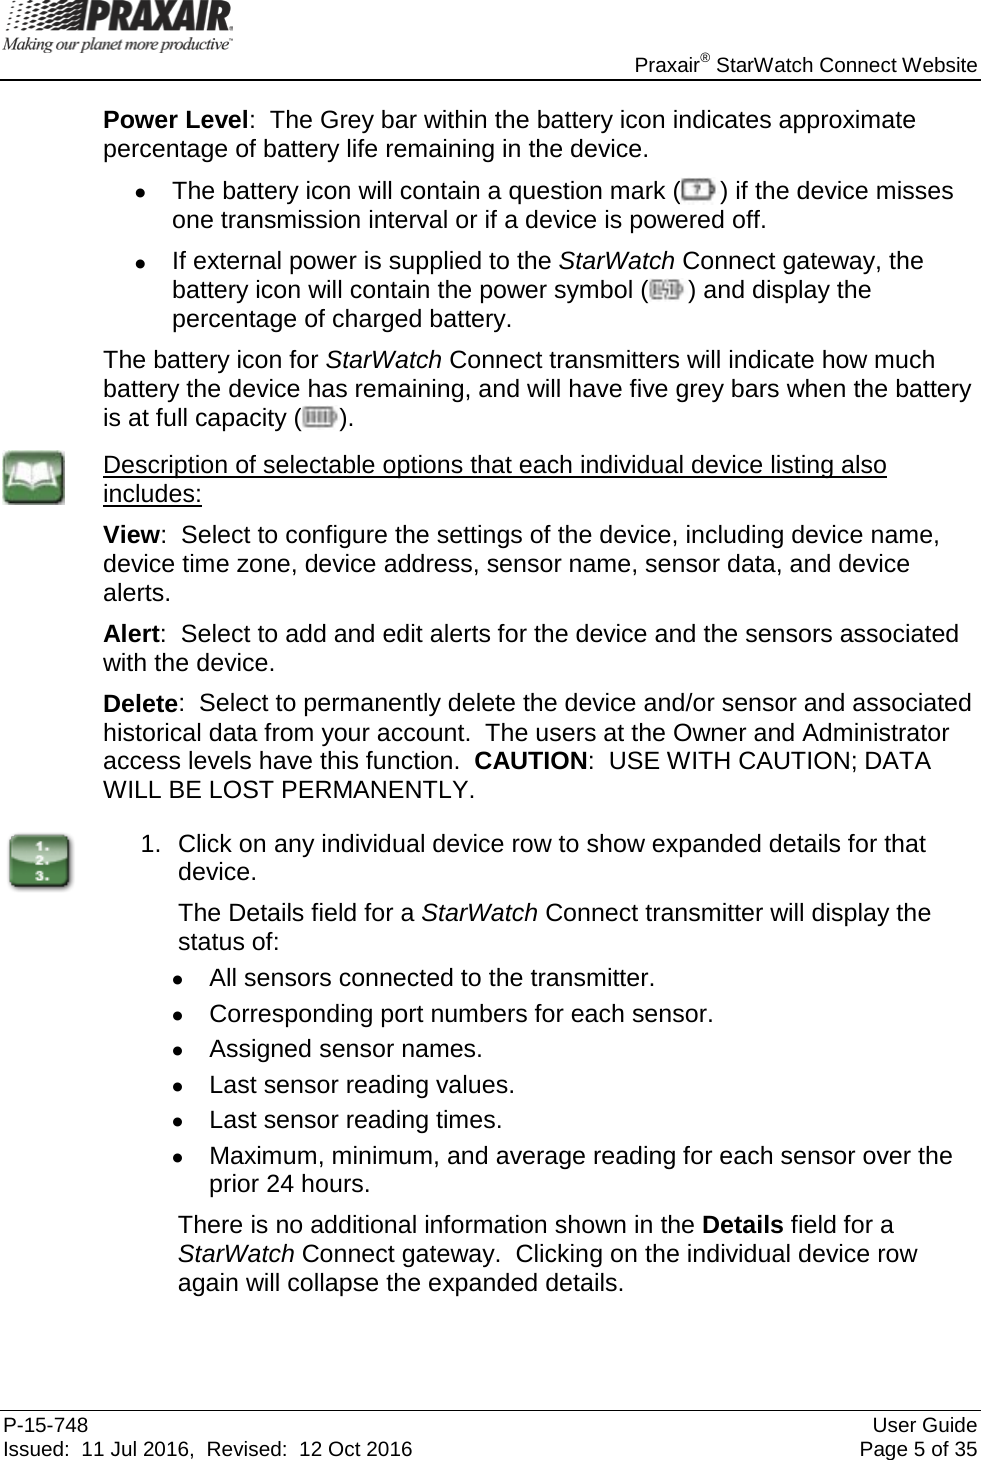    Praxair® StarWatch Connect Website P-15-748 User Guide Issued:  11 Jul 2016,  Revised:  12 Oct 2016 Page 5 of 35 Power Level:  The Grey bar within the battery icon indicates approximate percentage of battery life remaining in the device. • The battery icon will contain a question mark ( ) if the device misses one transmission interval or if a device is powered off.  • If external power is supplied to the StarWatch Connect gateway, the battery icon will contain the power symbol ( ) and display the percentage of charged battery. The battery icon for StarWatch Connect transmitters will indicate how much battery the device has remaining, and will have five grey bars when the battery is at full capacity ( ).  Description of selectable options that each individual device listing also includes: View:  Select to configure the settings of the device, including device name, device time zone, device address, sensor name, sensor data, and device alerts. Alert:  Select to add and edit alerts for the device and the sensors associated with the device. Delete:  Select to permanently delete the device and/or sensor and associated historical data from your account.  The users at the Owner and Administrator access levels have this function.  CAUTION:  USE WITH CAUTION; DATA WILL BE LOST PERMANENTLY.  1. Click on any individual device row to show expanded details for that device.   The Details field for a StarWatch Connect transmitter will display the status of: •  All sensors connected to the transmitter. •  Corresponding port numbers for each sensor. • Assigned sensor names. •  Last sensor reading values. • Last sensor reading times. •  Maximum, minimum, and average reading for each sensor over the prior 24 hours.  There is no additional information shown in the Details field for a StarWatch Connect gateway.  Clicking on the individual device row again will collapse the expanded details.  